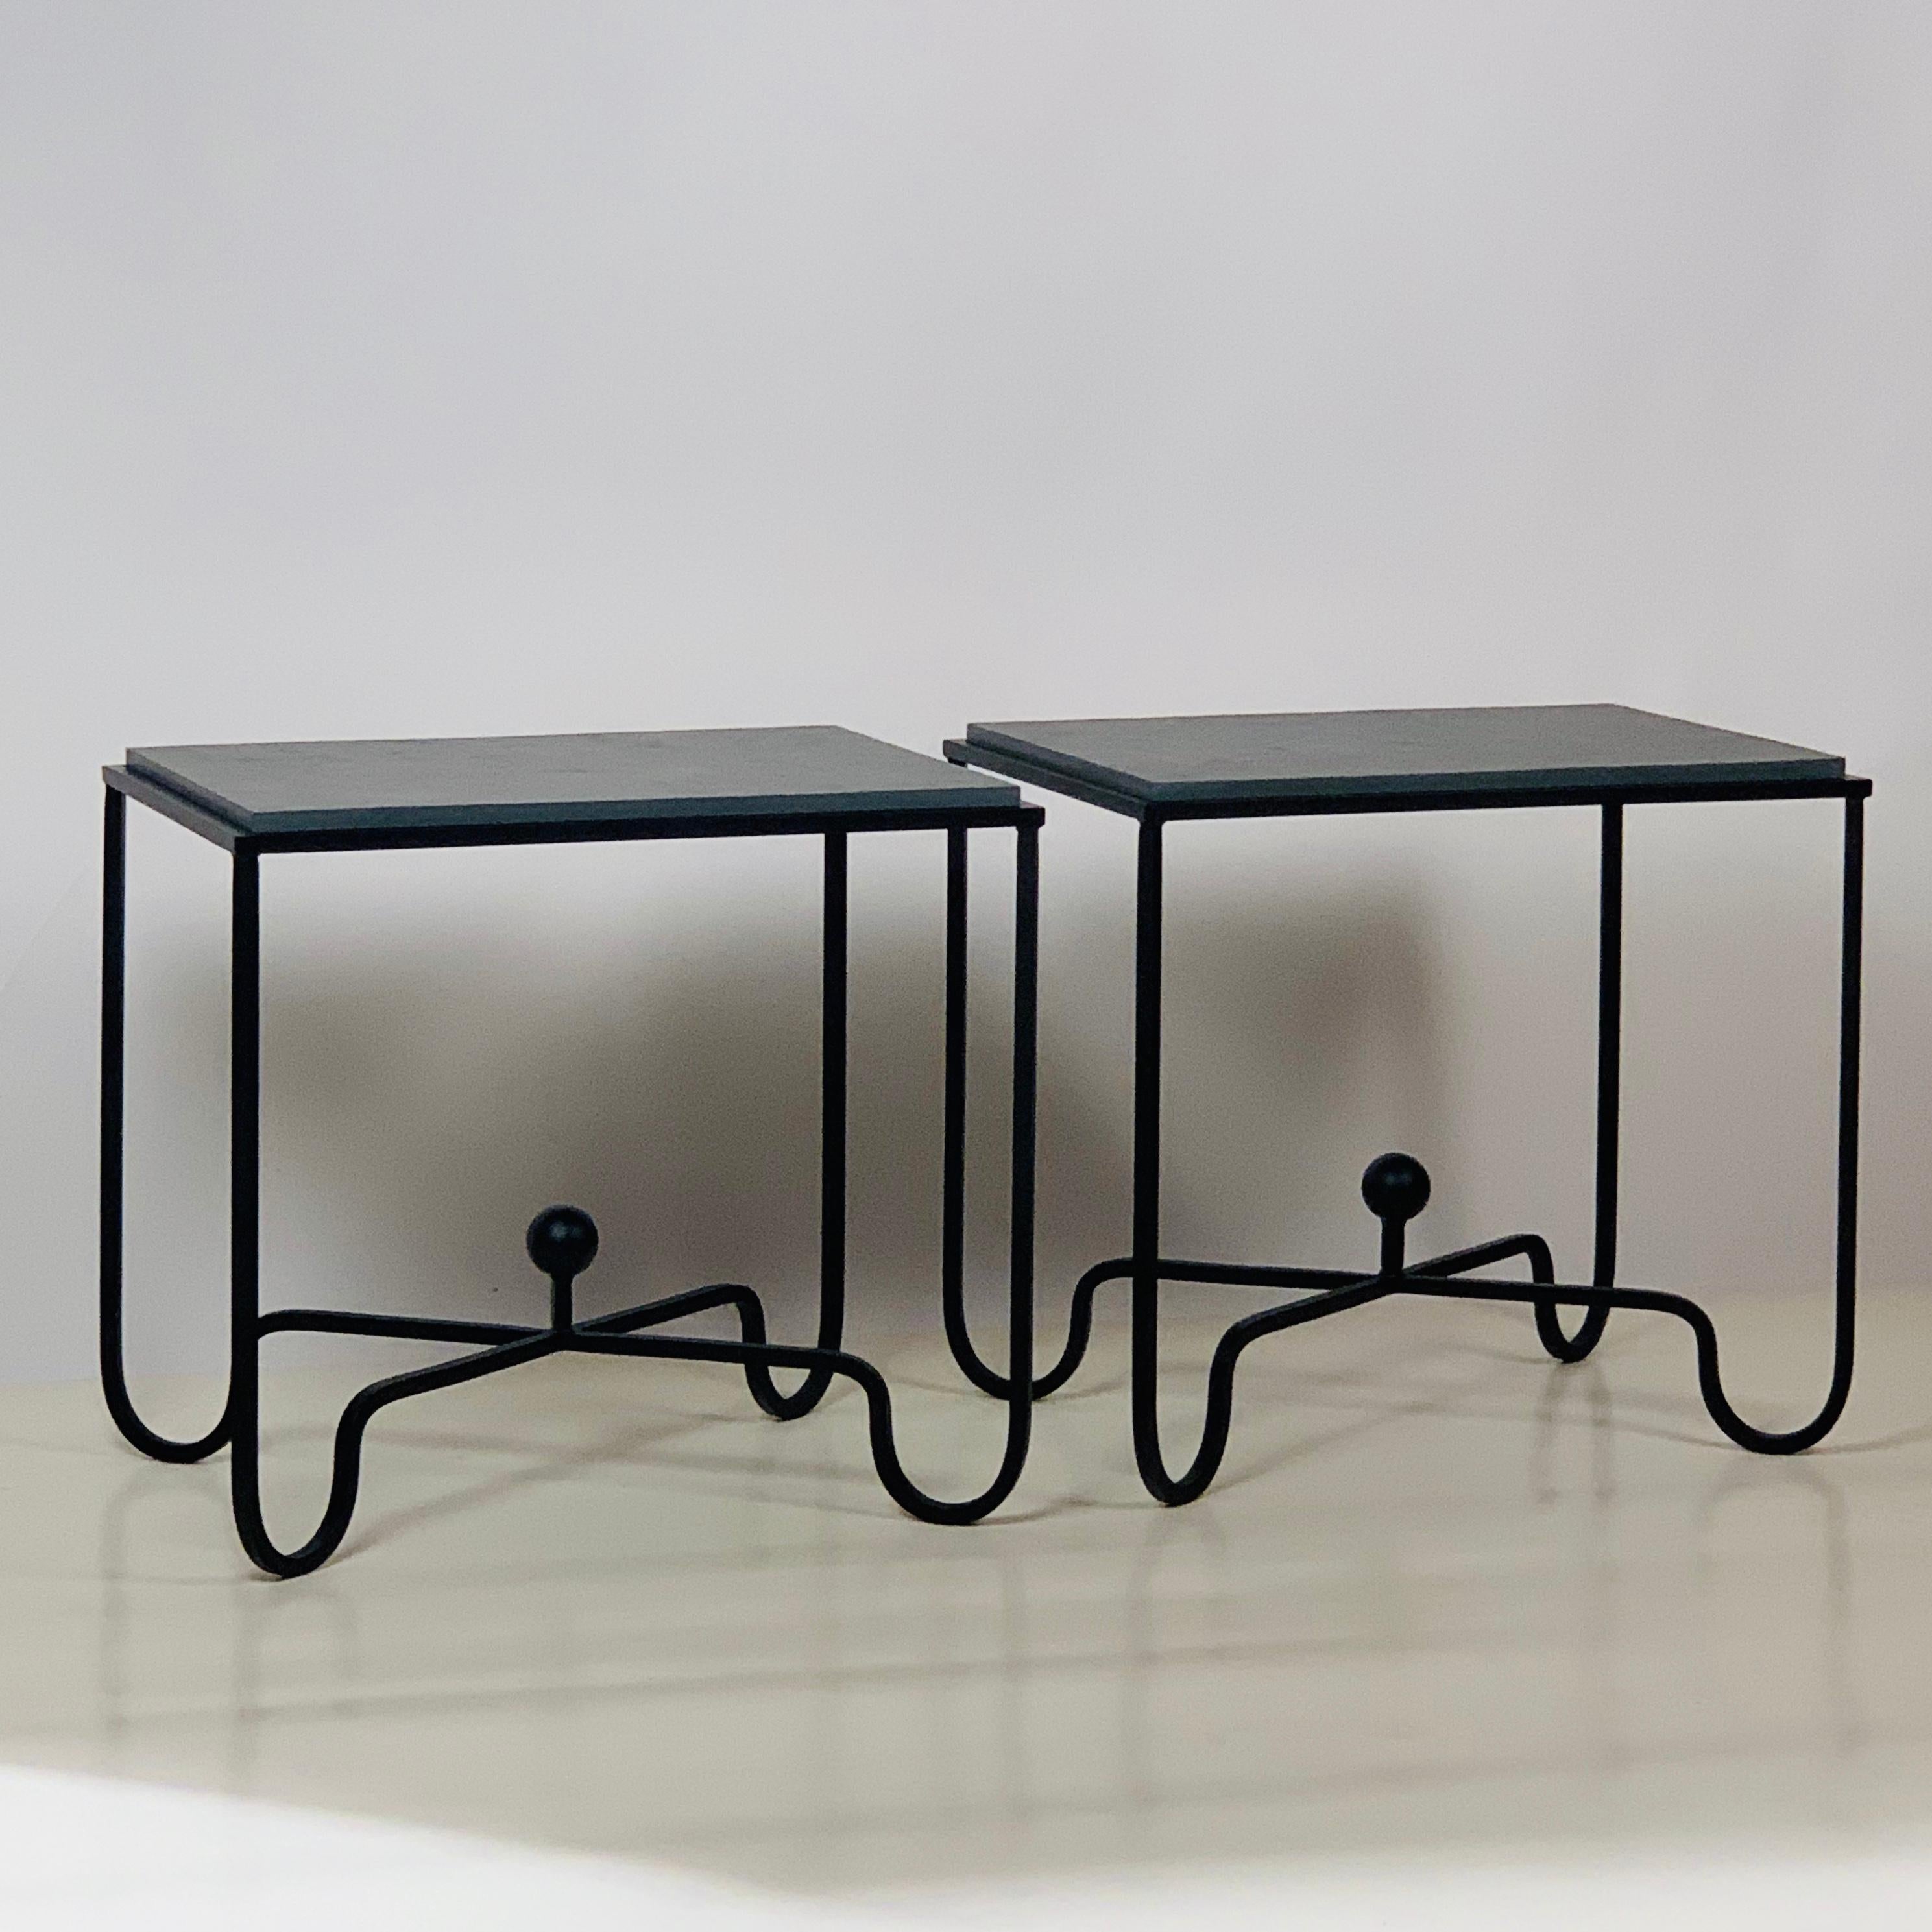 Pair of chic grey slate 'Entretoise' side tables by Design Frères. Also great as a two-part coffee table or as simple nightstands.